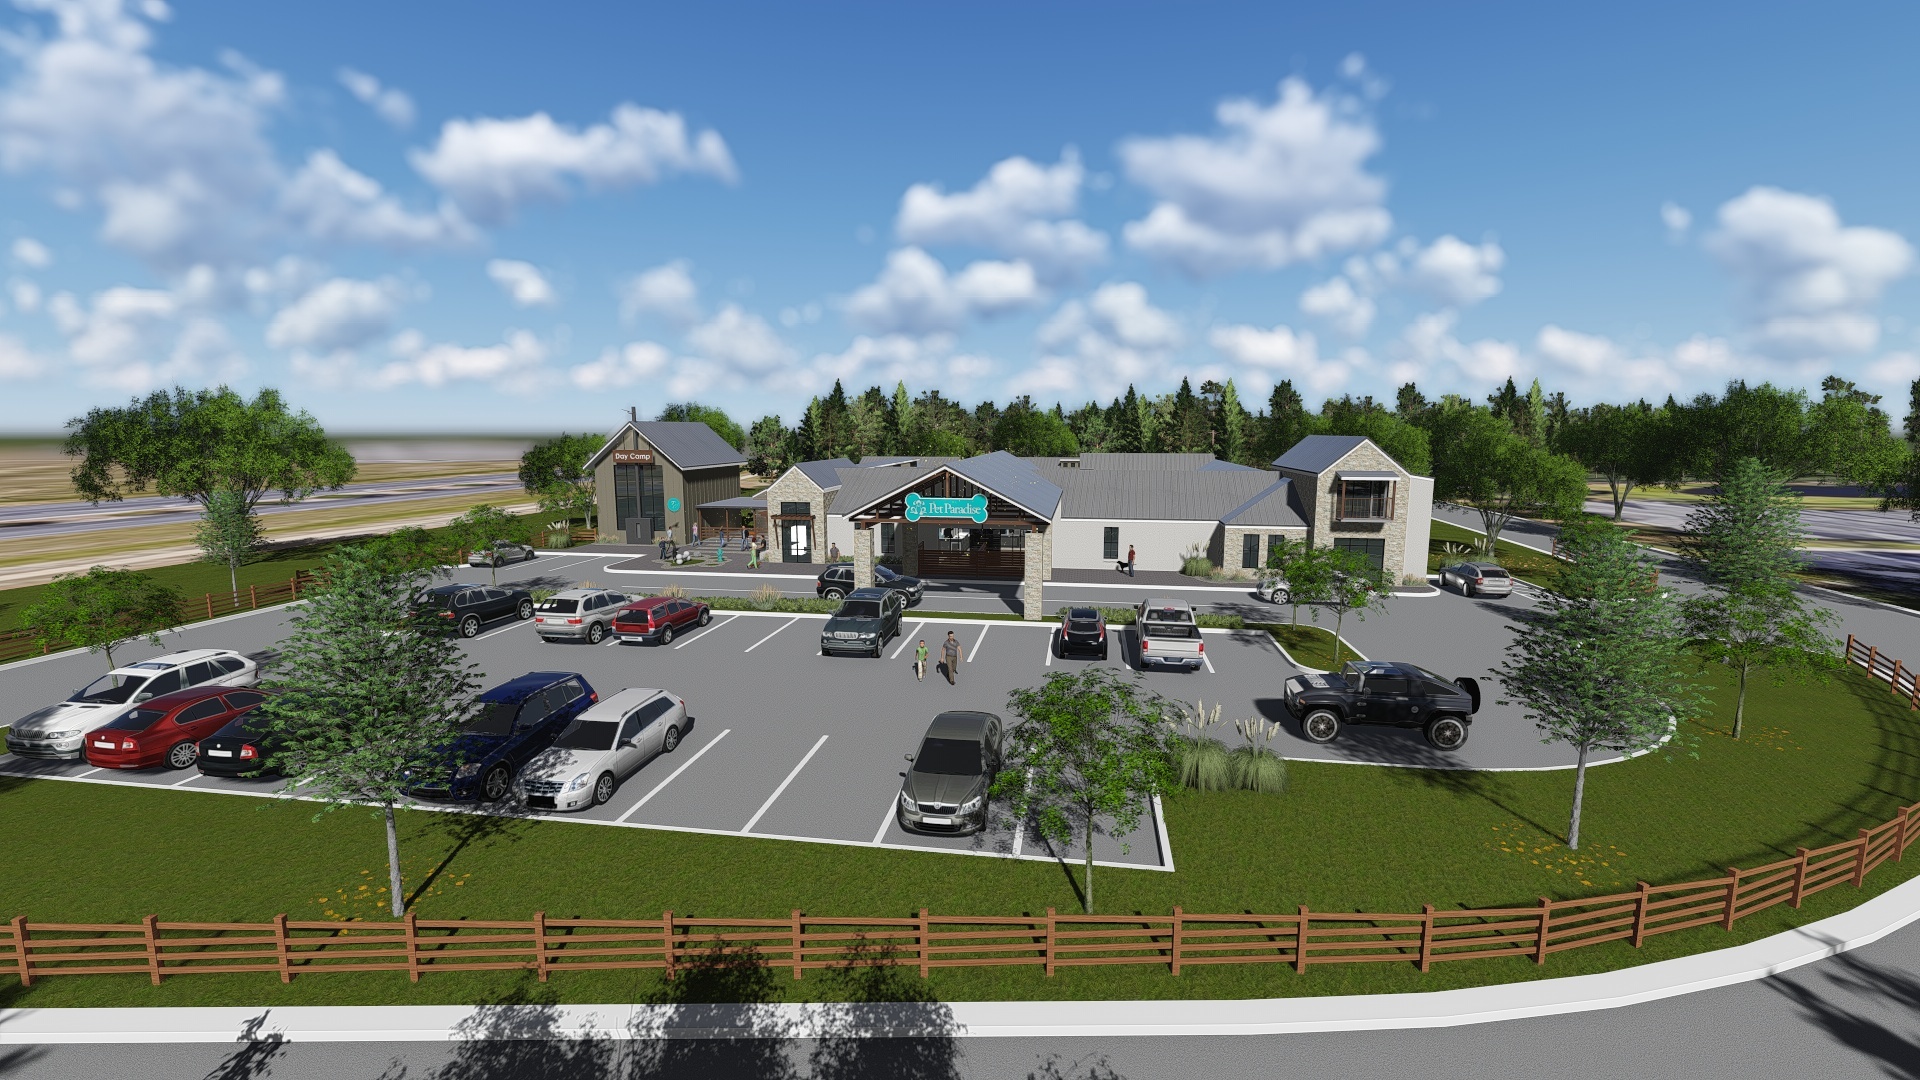 Pet Paradise, a Jacksonville-based pet service provider, with everything from boarding and day camp to grooming and veterinary services, plans to open in Lakewood Ranch in July.